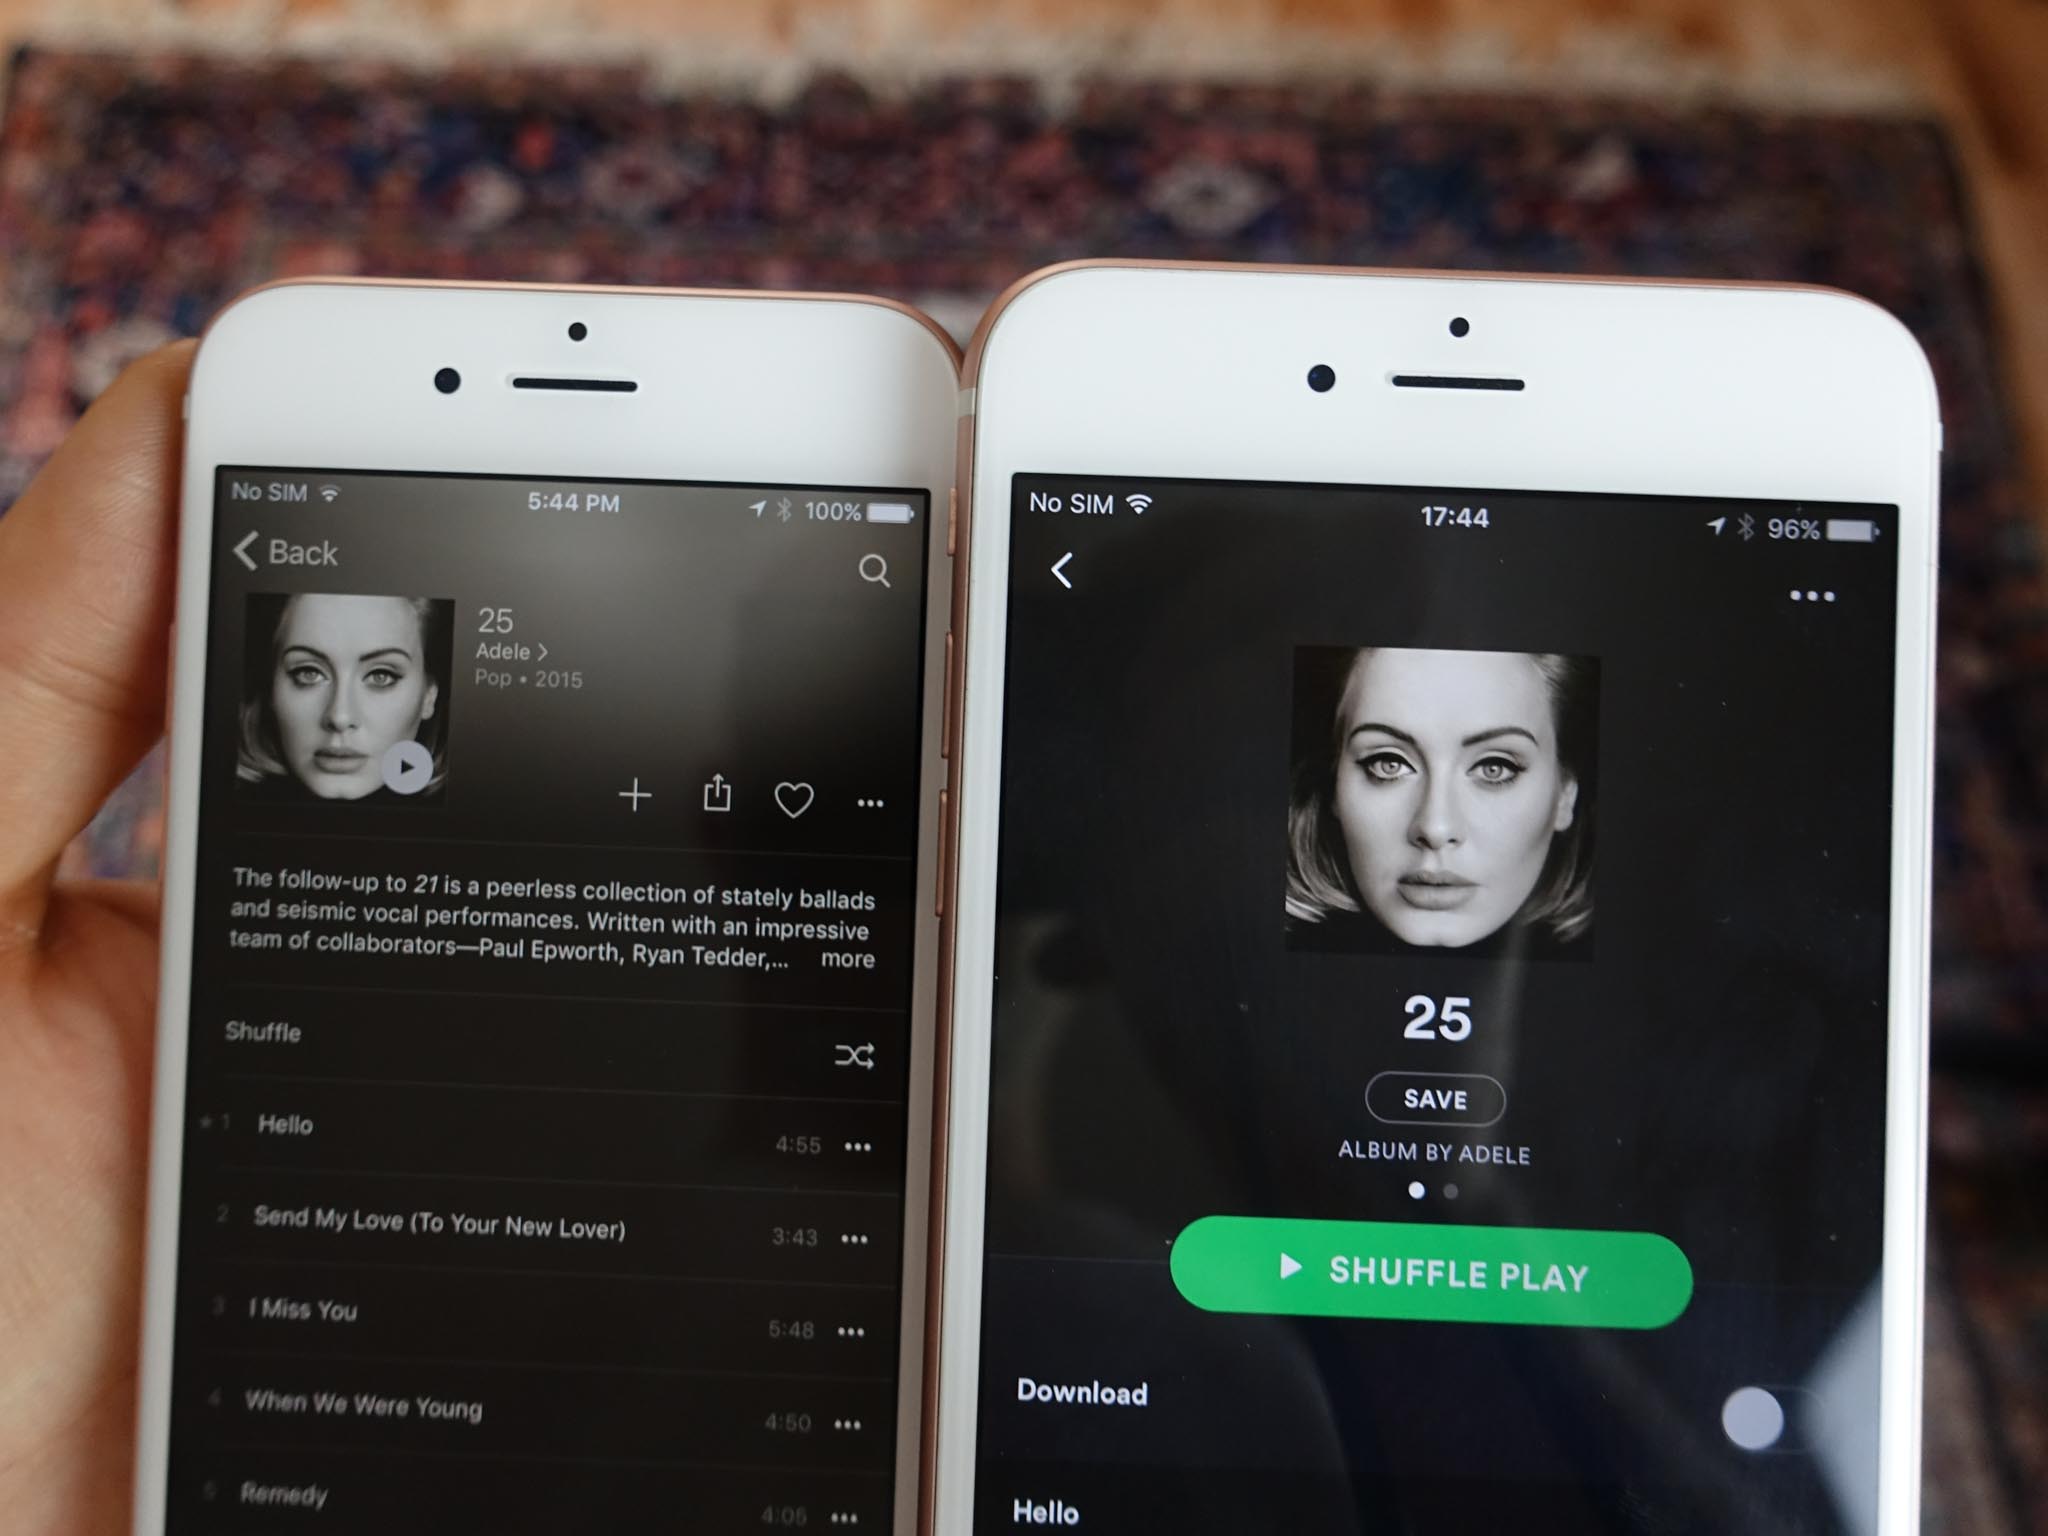 Play spotify on apple watch without phone